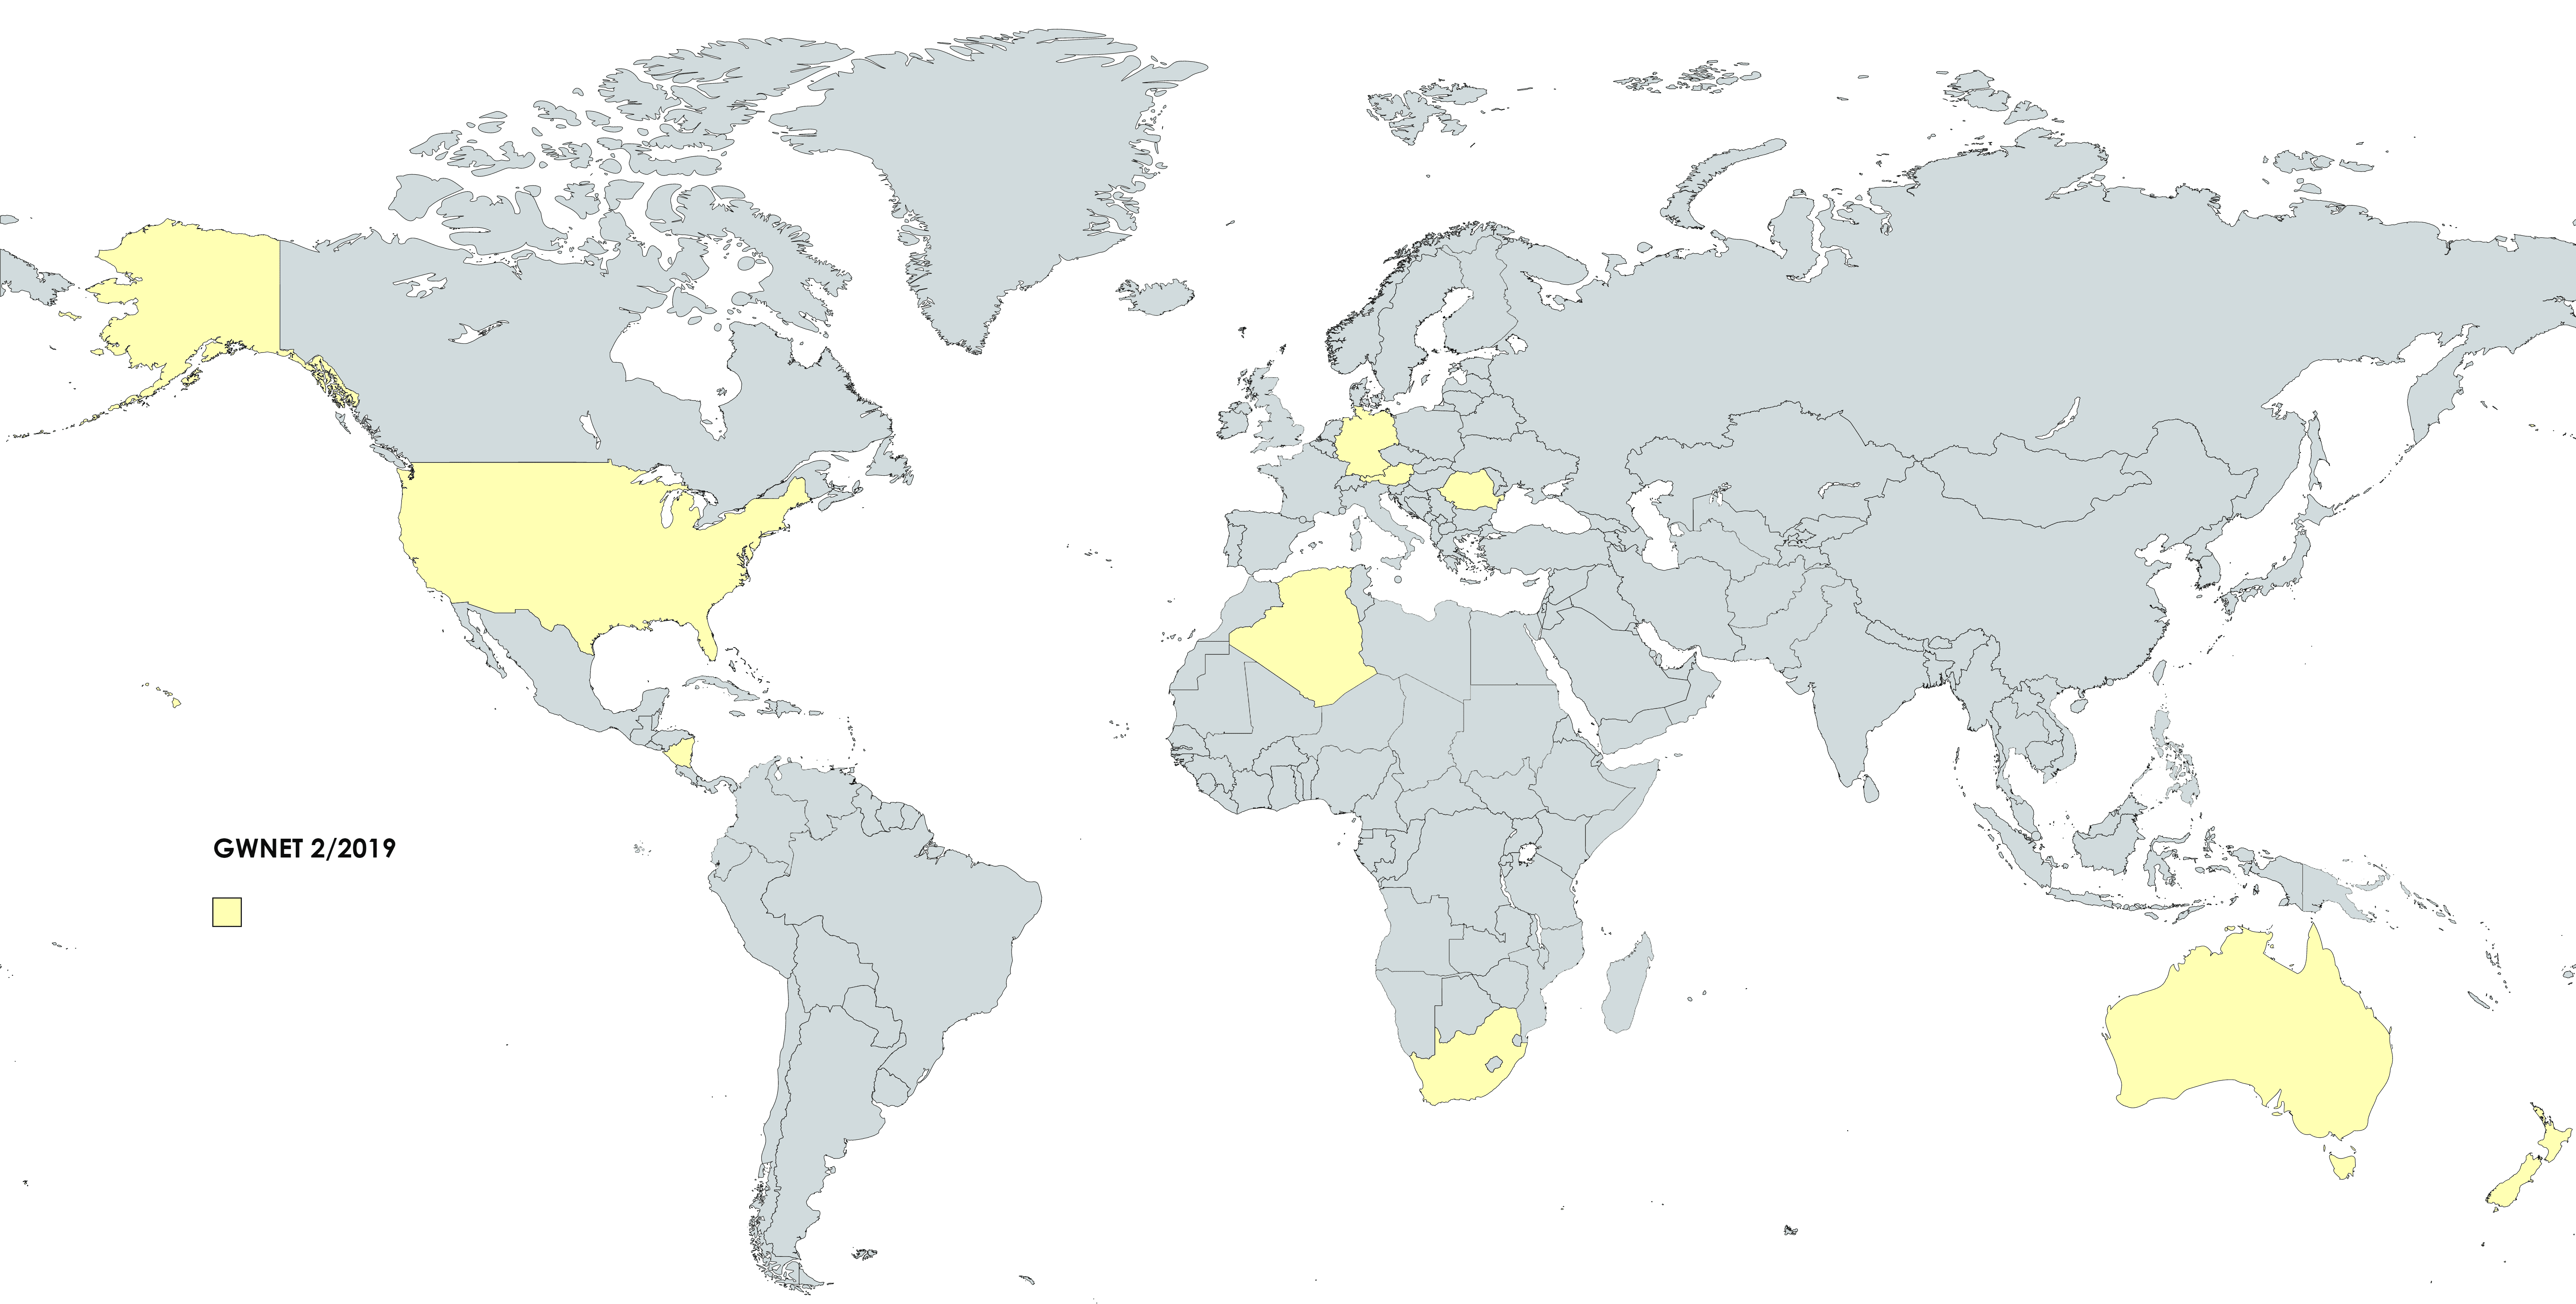 Mentor Countries for GWNET 2/2019 programme